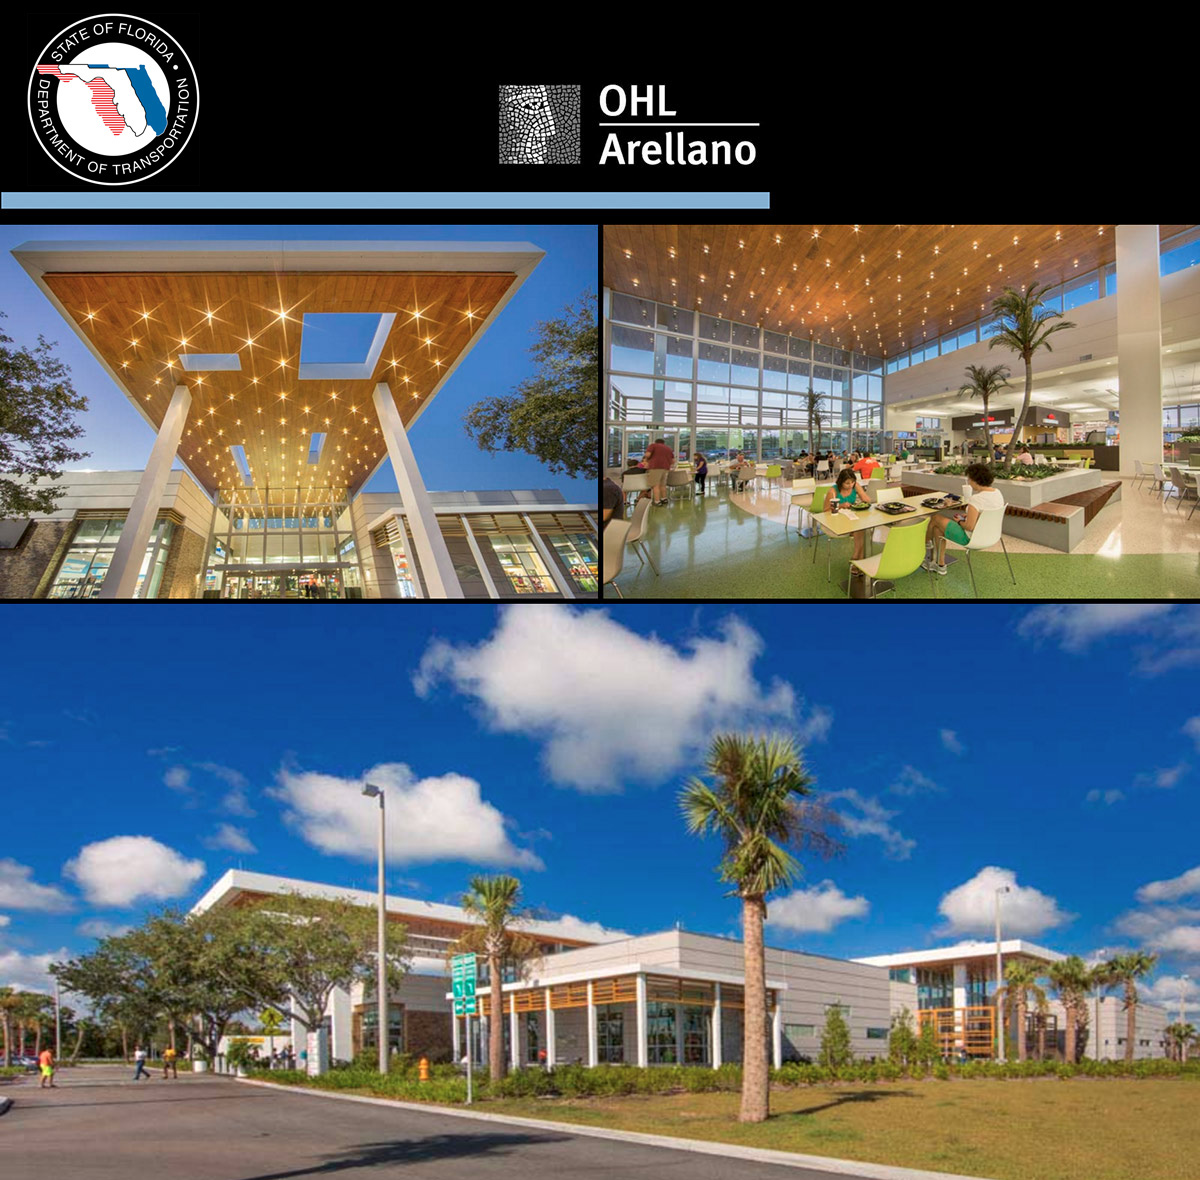 Architectural and interior design views of Fort Drum Service Plaza - Okeechobee, FL